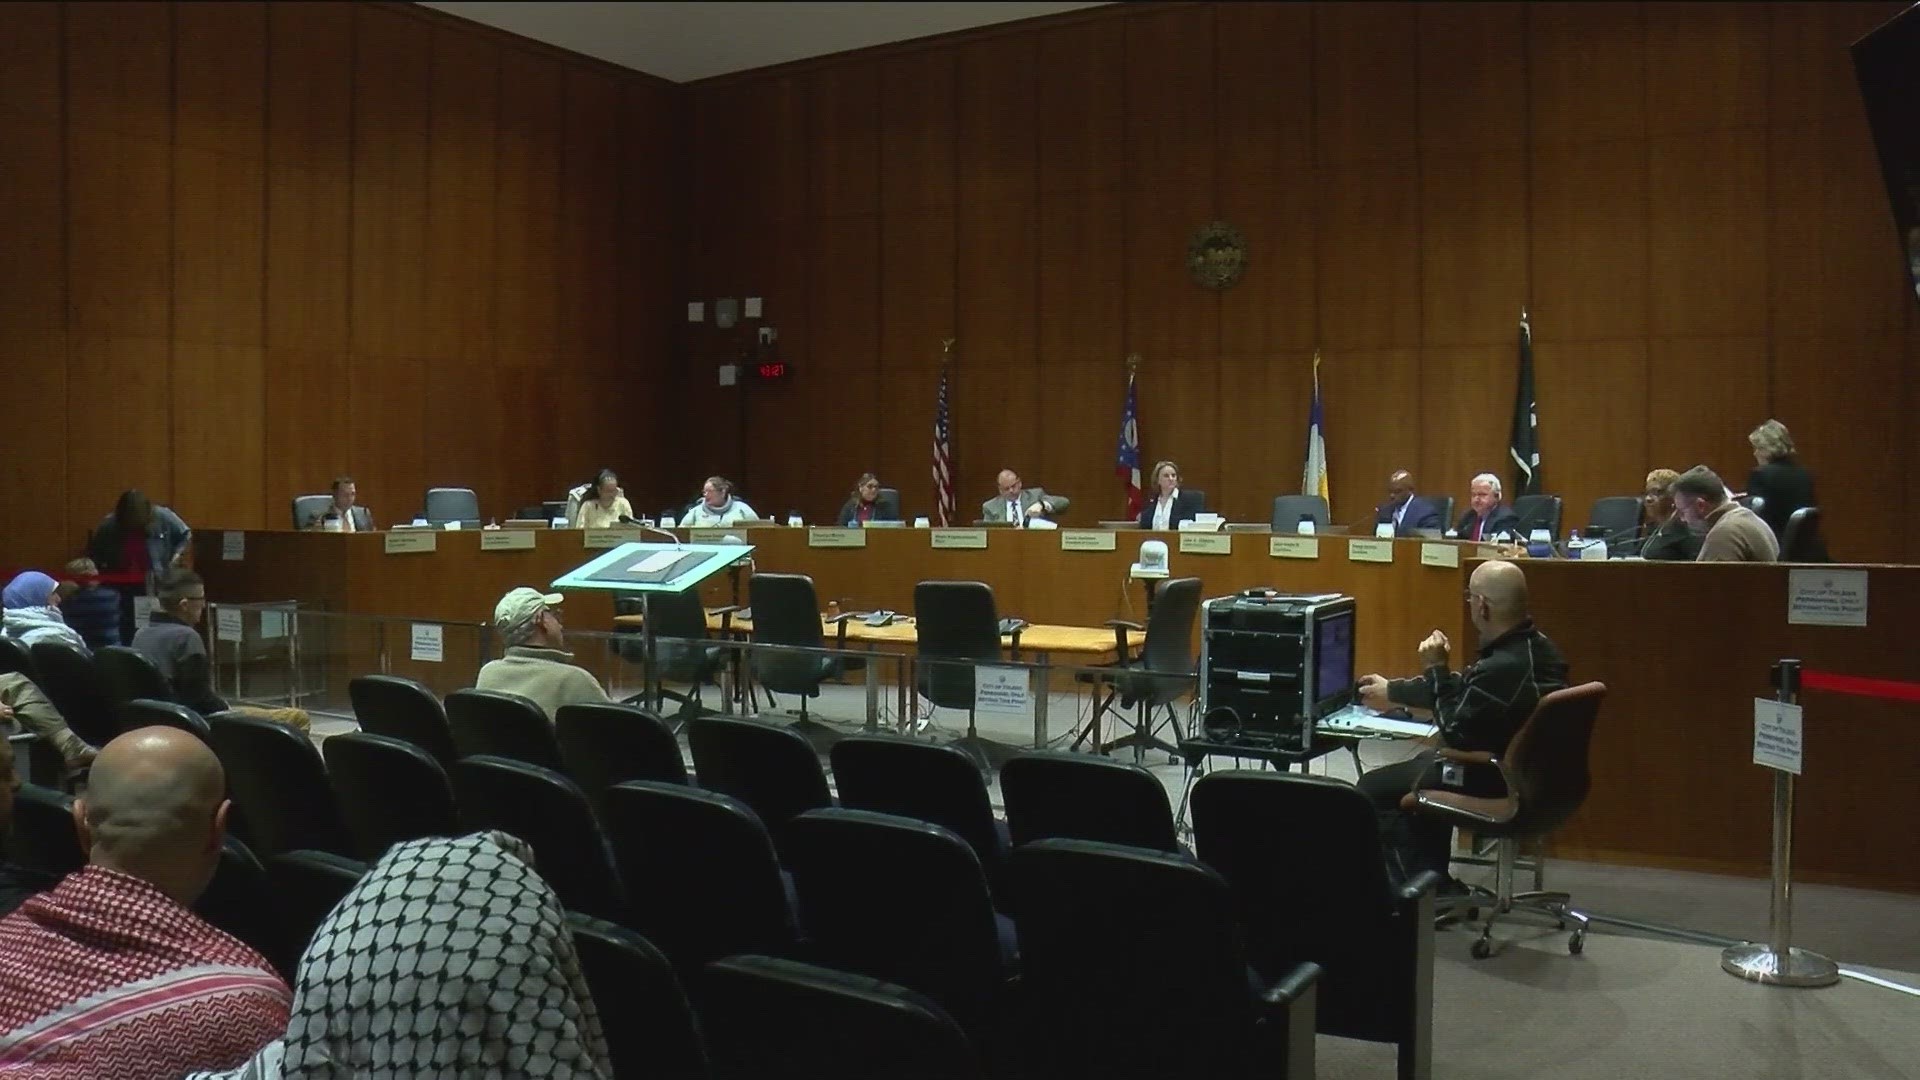 Council unanimously passed a resolution Tuesday condemning discrimination and hate in the city and calling for a peaceful resolution in Palestine and Israel.